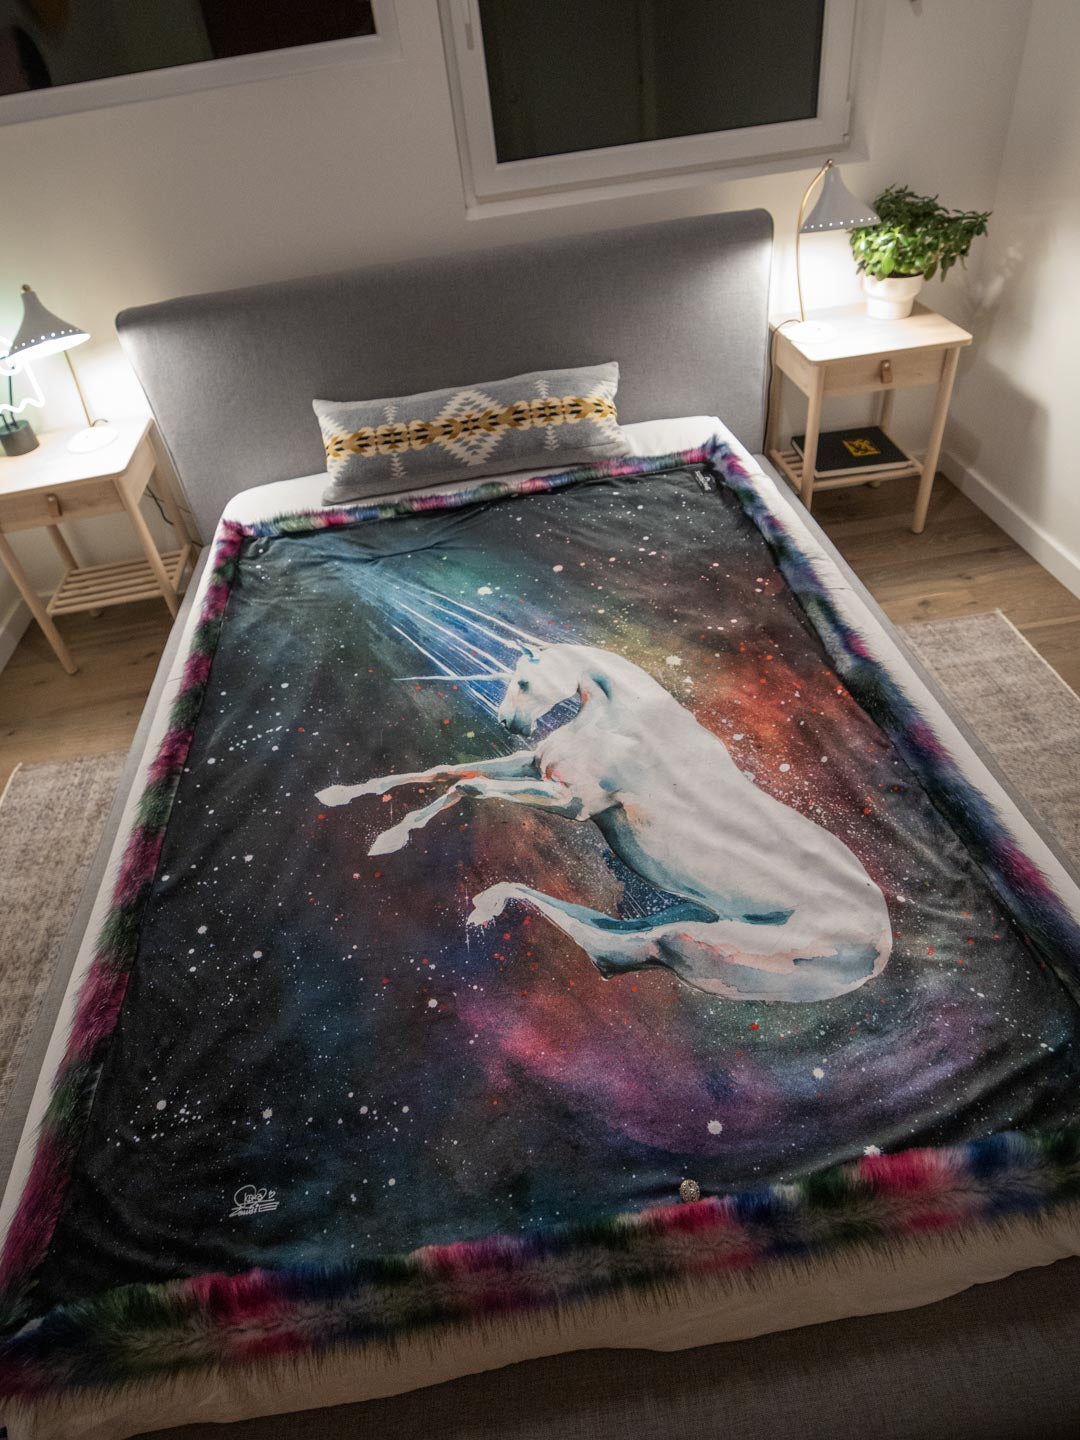 How to Make Magical Looking Galaxy Furniture - How To Unicorn